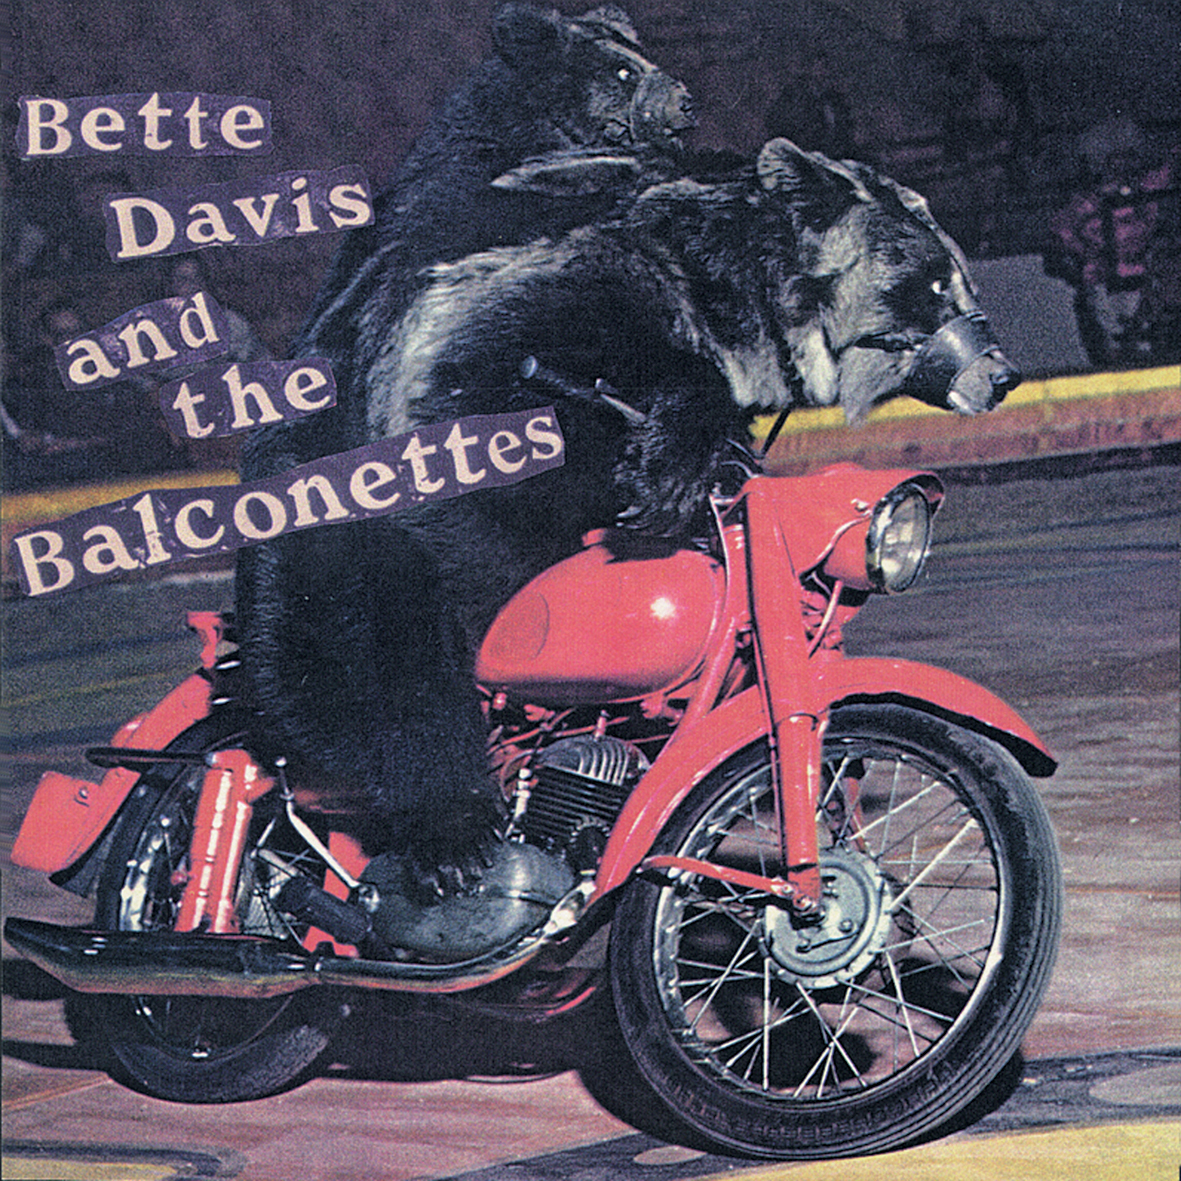 BETTE DAVIS AND THE BALCONETTES - Damaged Goods